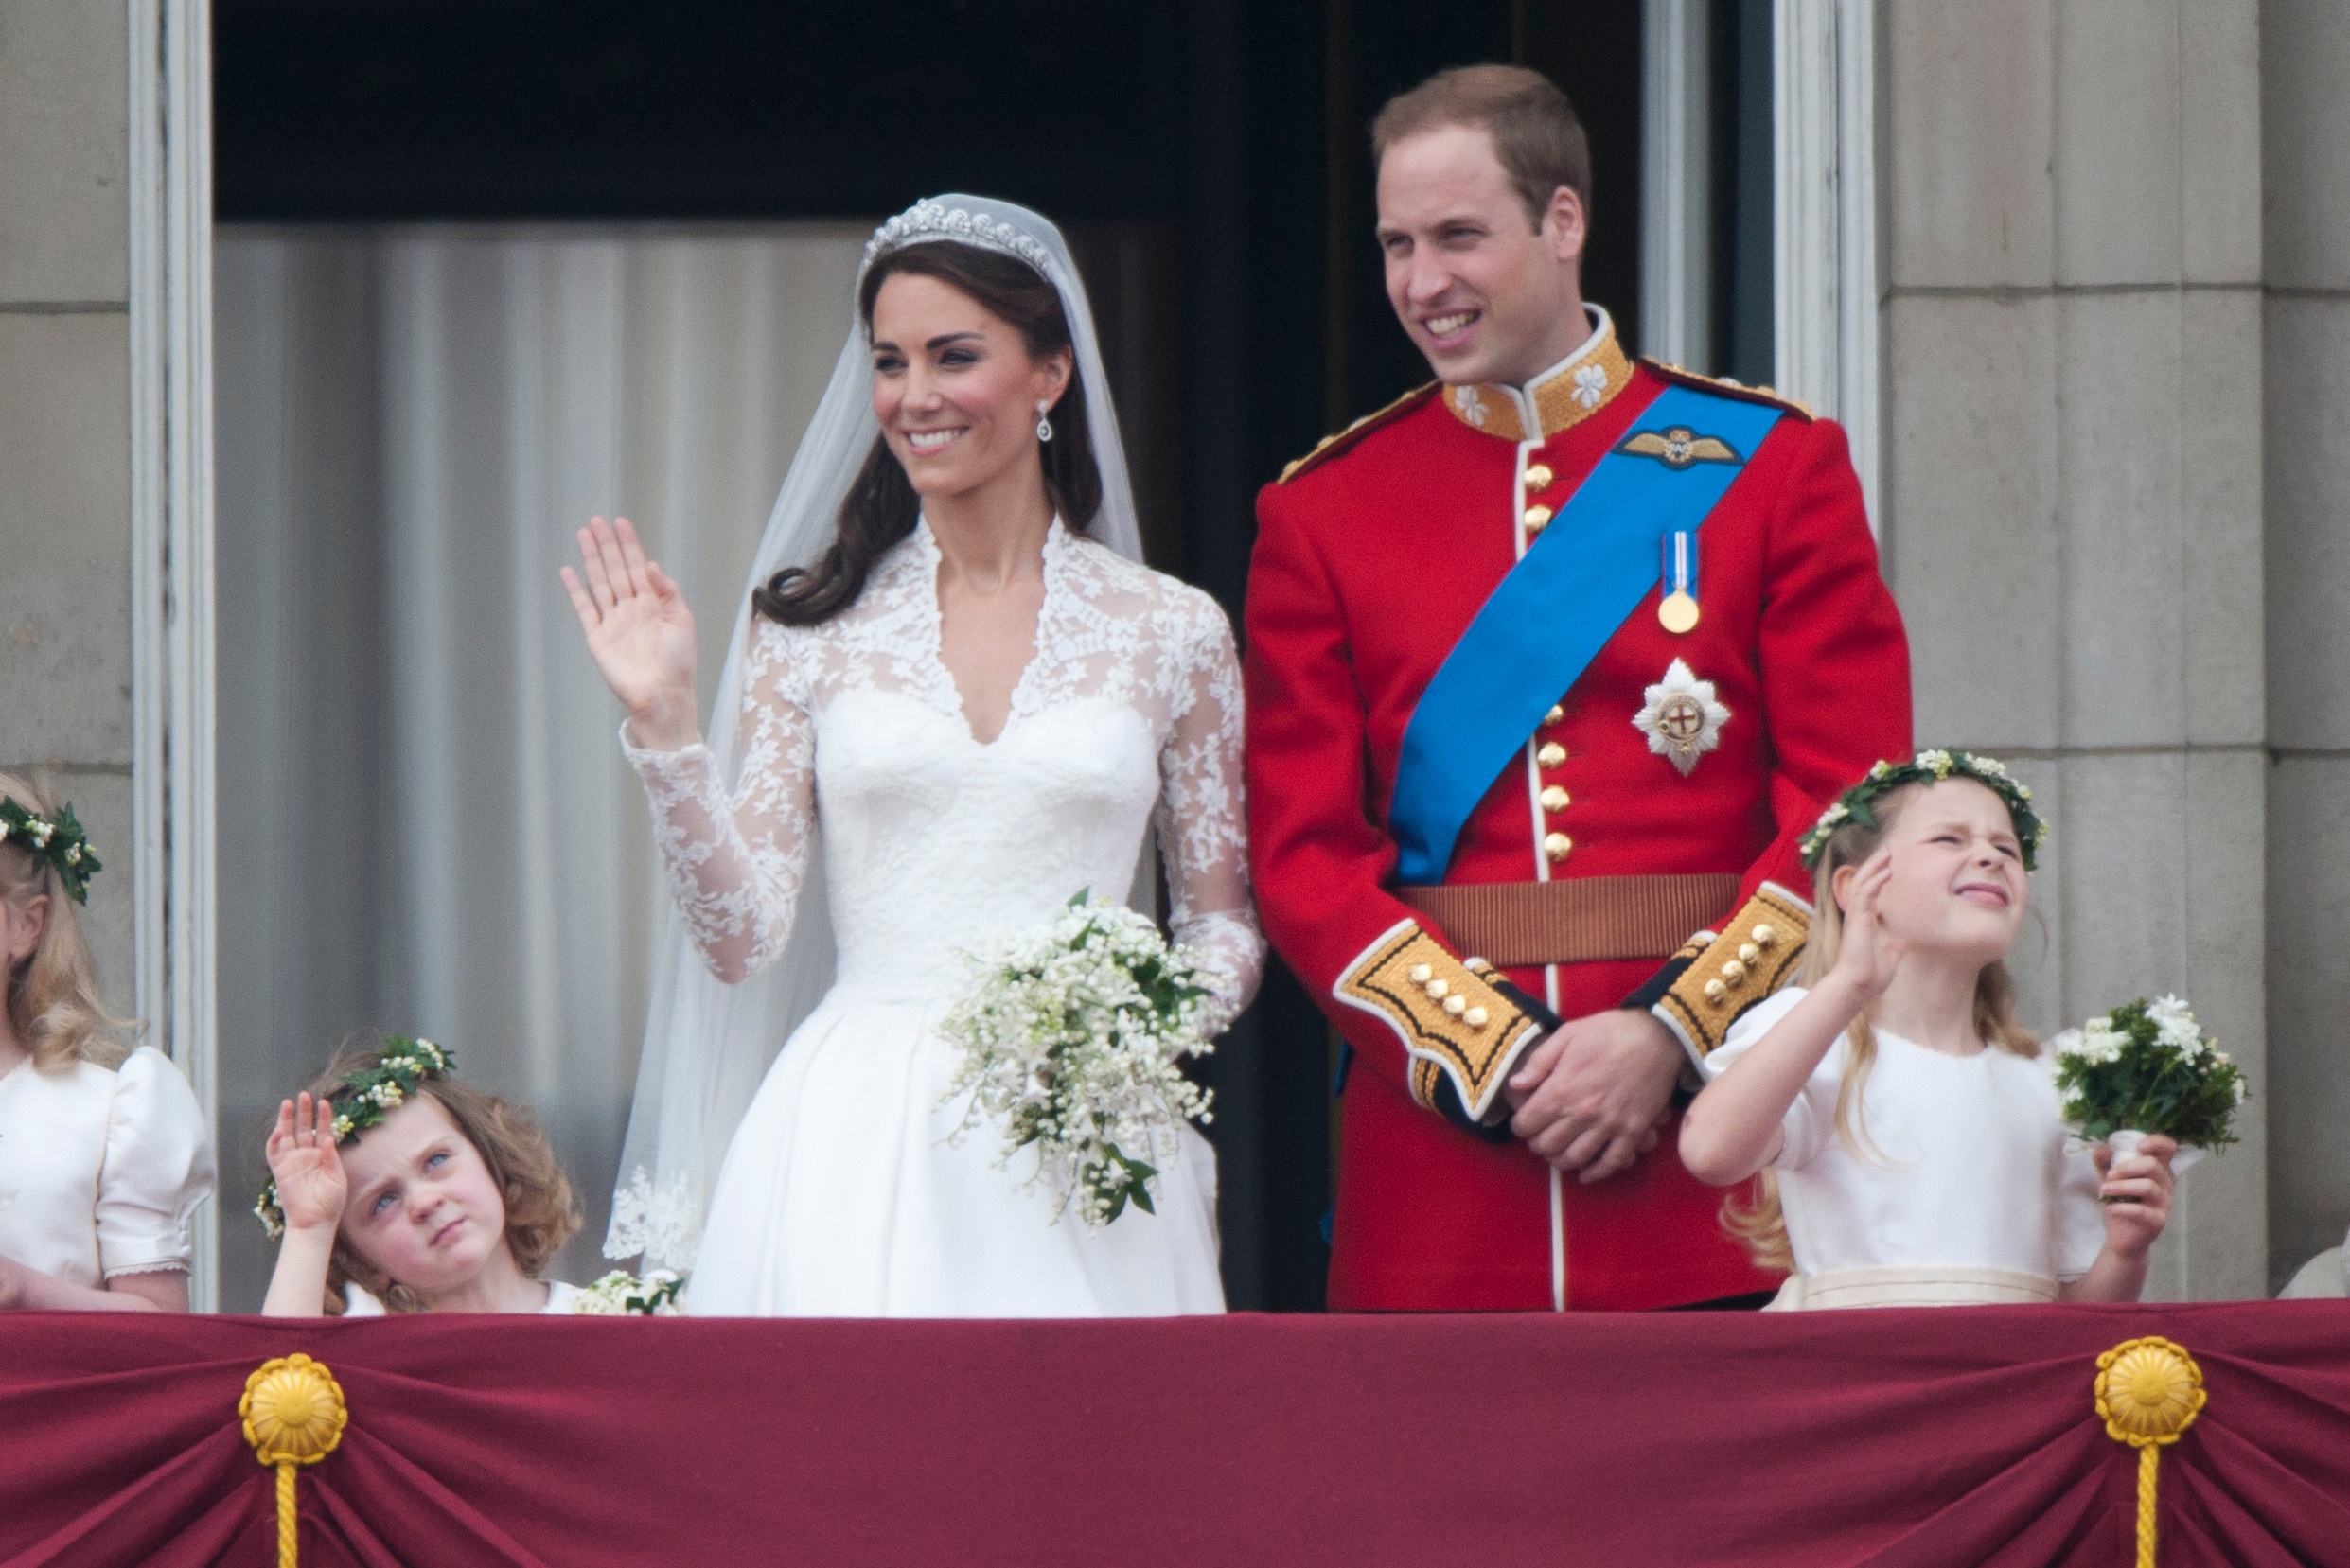 Catherine, Duchess of Cambridge and Prince William, Duke of Cambridge on the balcony at Buckingham Palace with Bridesmaids Margarita Armstrong-Jones (Right) And Grace Van Cutsem (Left), following their wedding at Westminster Abbey on April 29, 2011 in London, England. (Photo by Mark Cuthbert—UK Press/Getty)